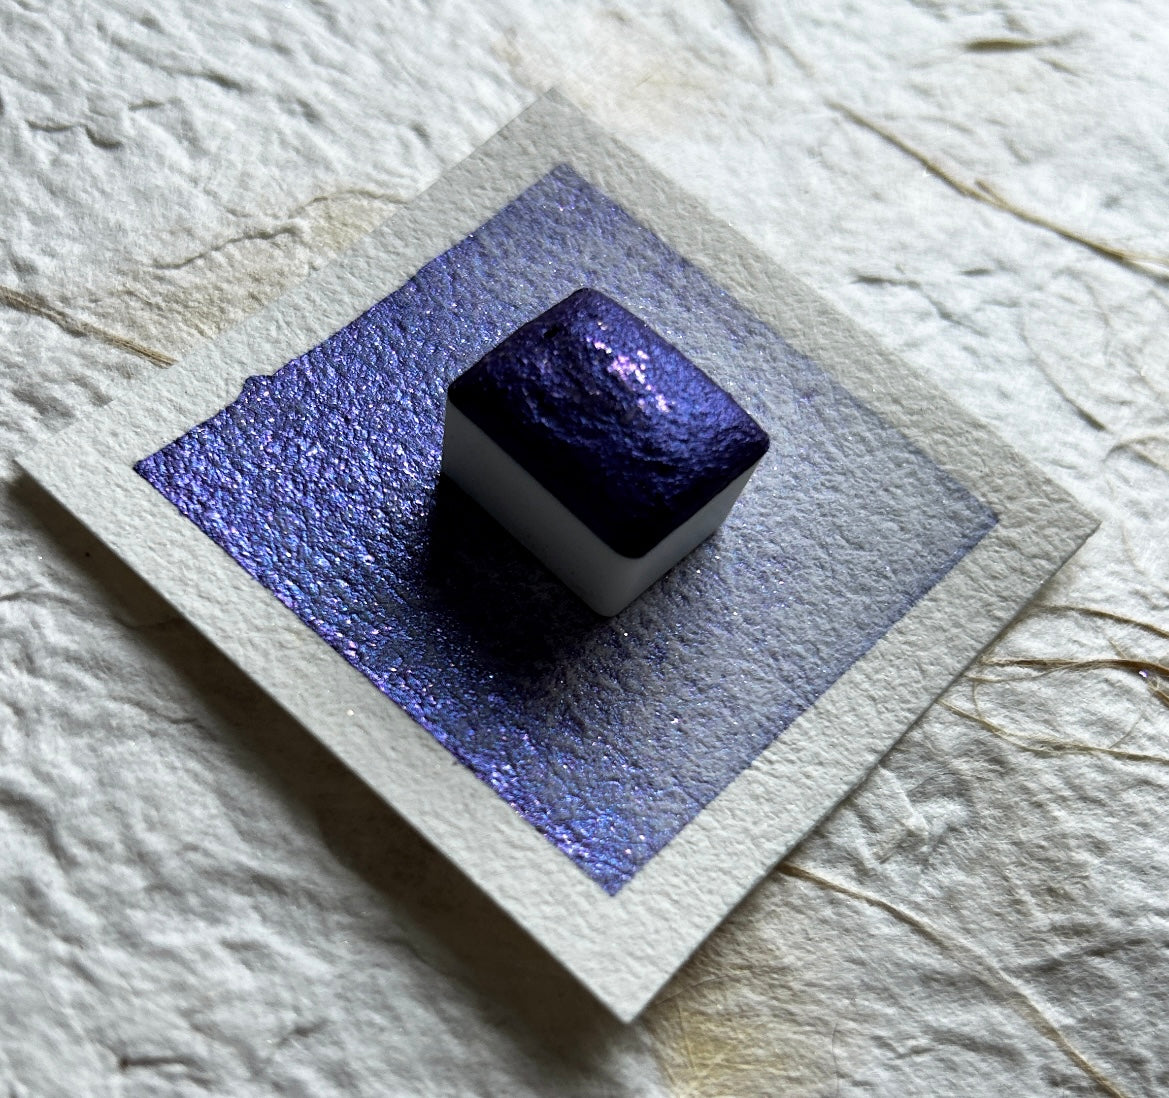 ✹New✹ "House of Sparks" (Version 2) - Synthetic Mica Purple Shimmer - Individual Pan